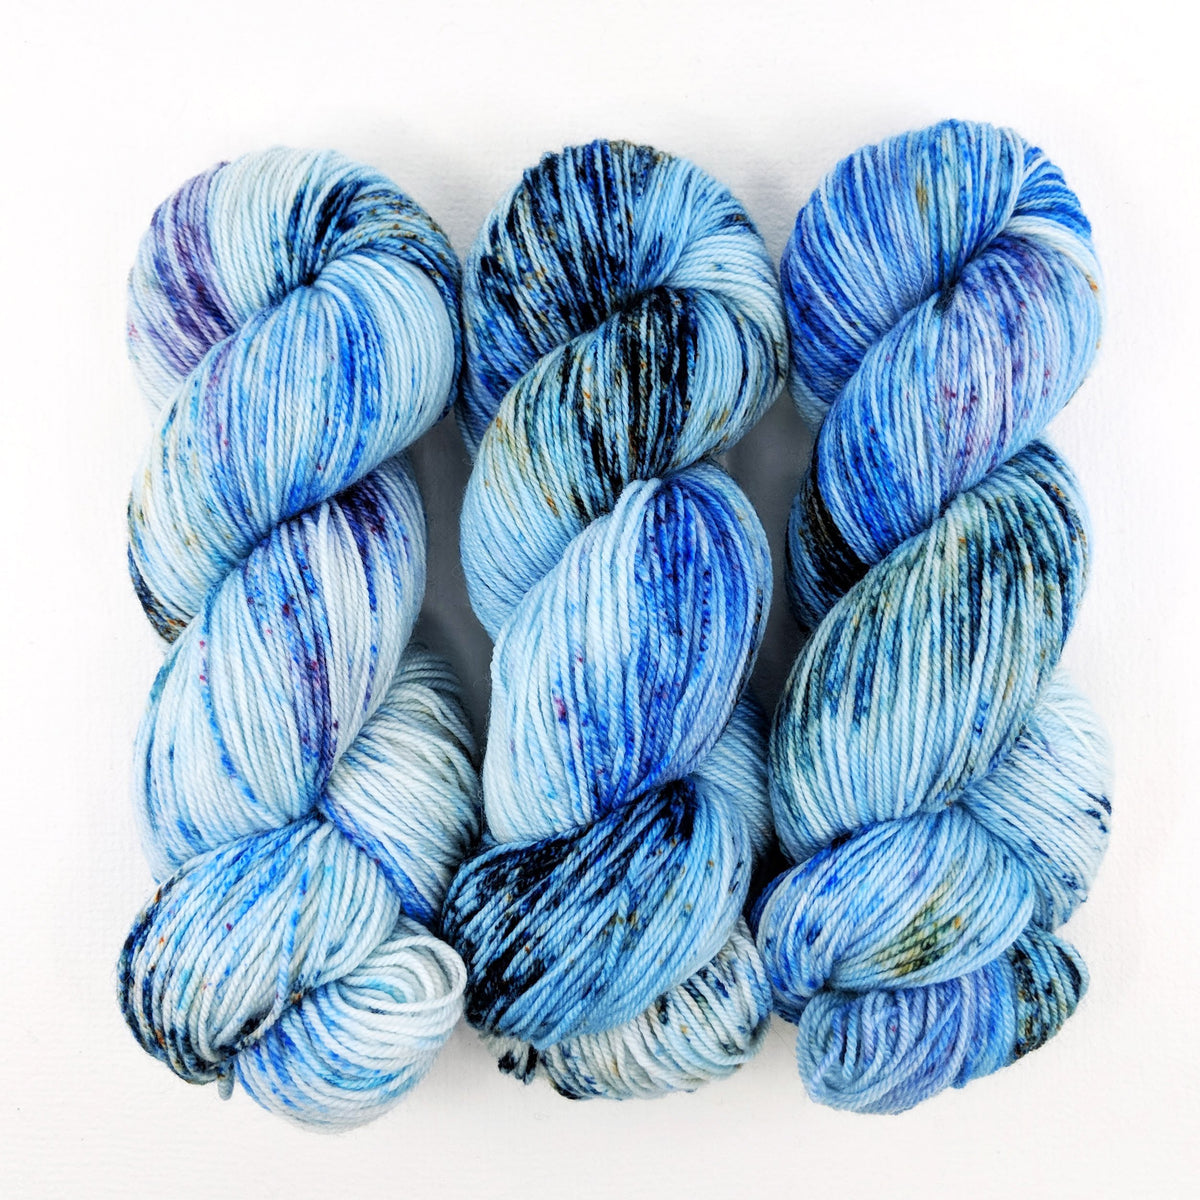 Picasso in Blue - Nettle Soft DK - Dyed Stock